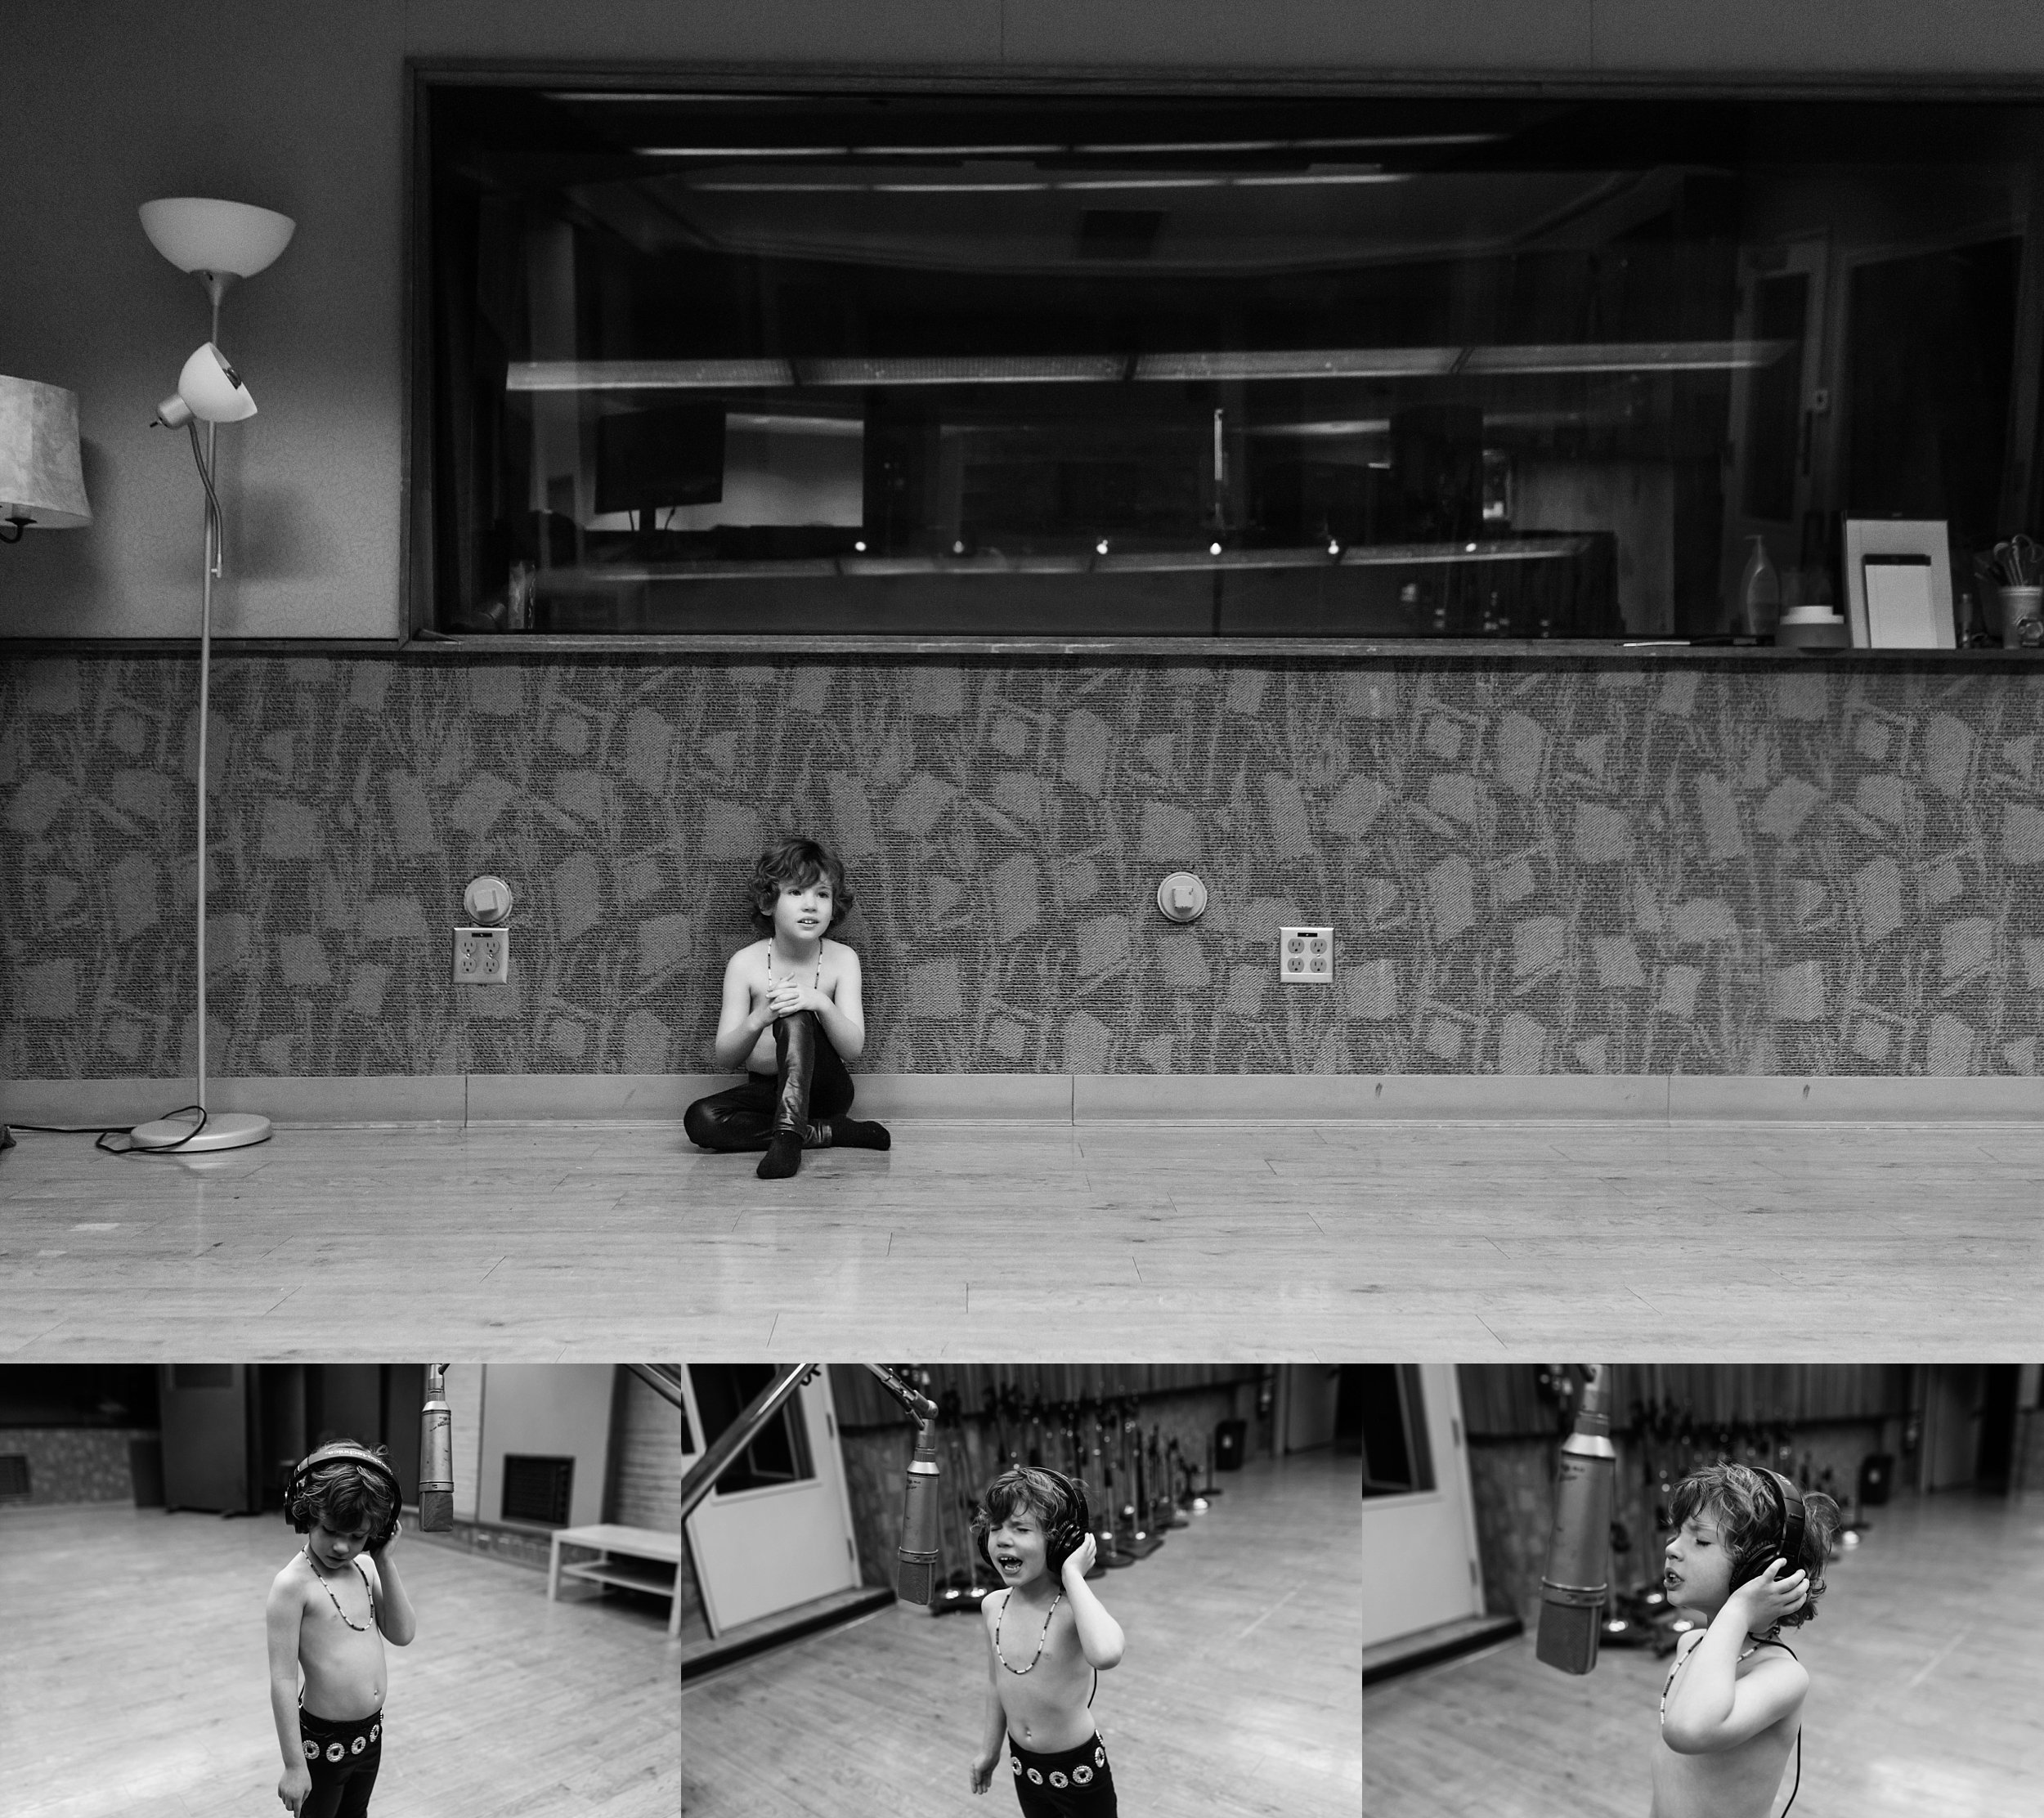 5 year old recording music at Sunset Studios as Jim Morrison from The Doors by A Pocket of Time Photography